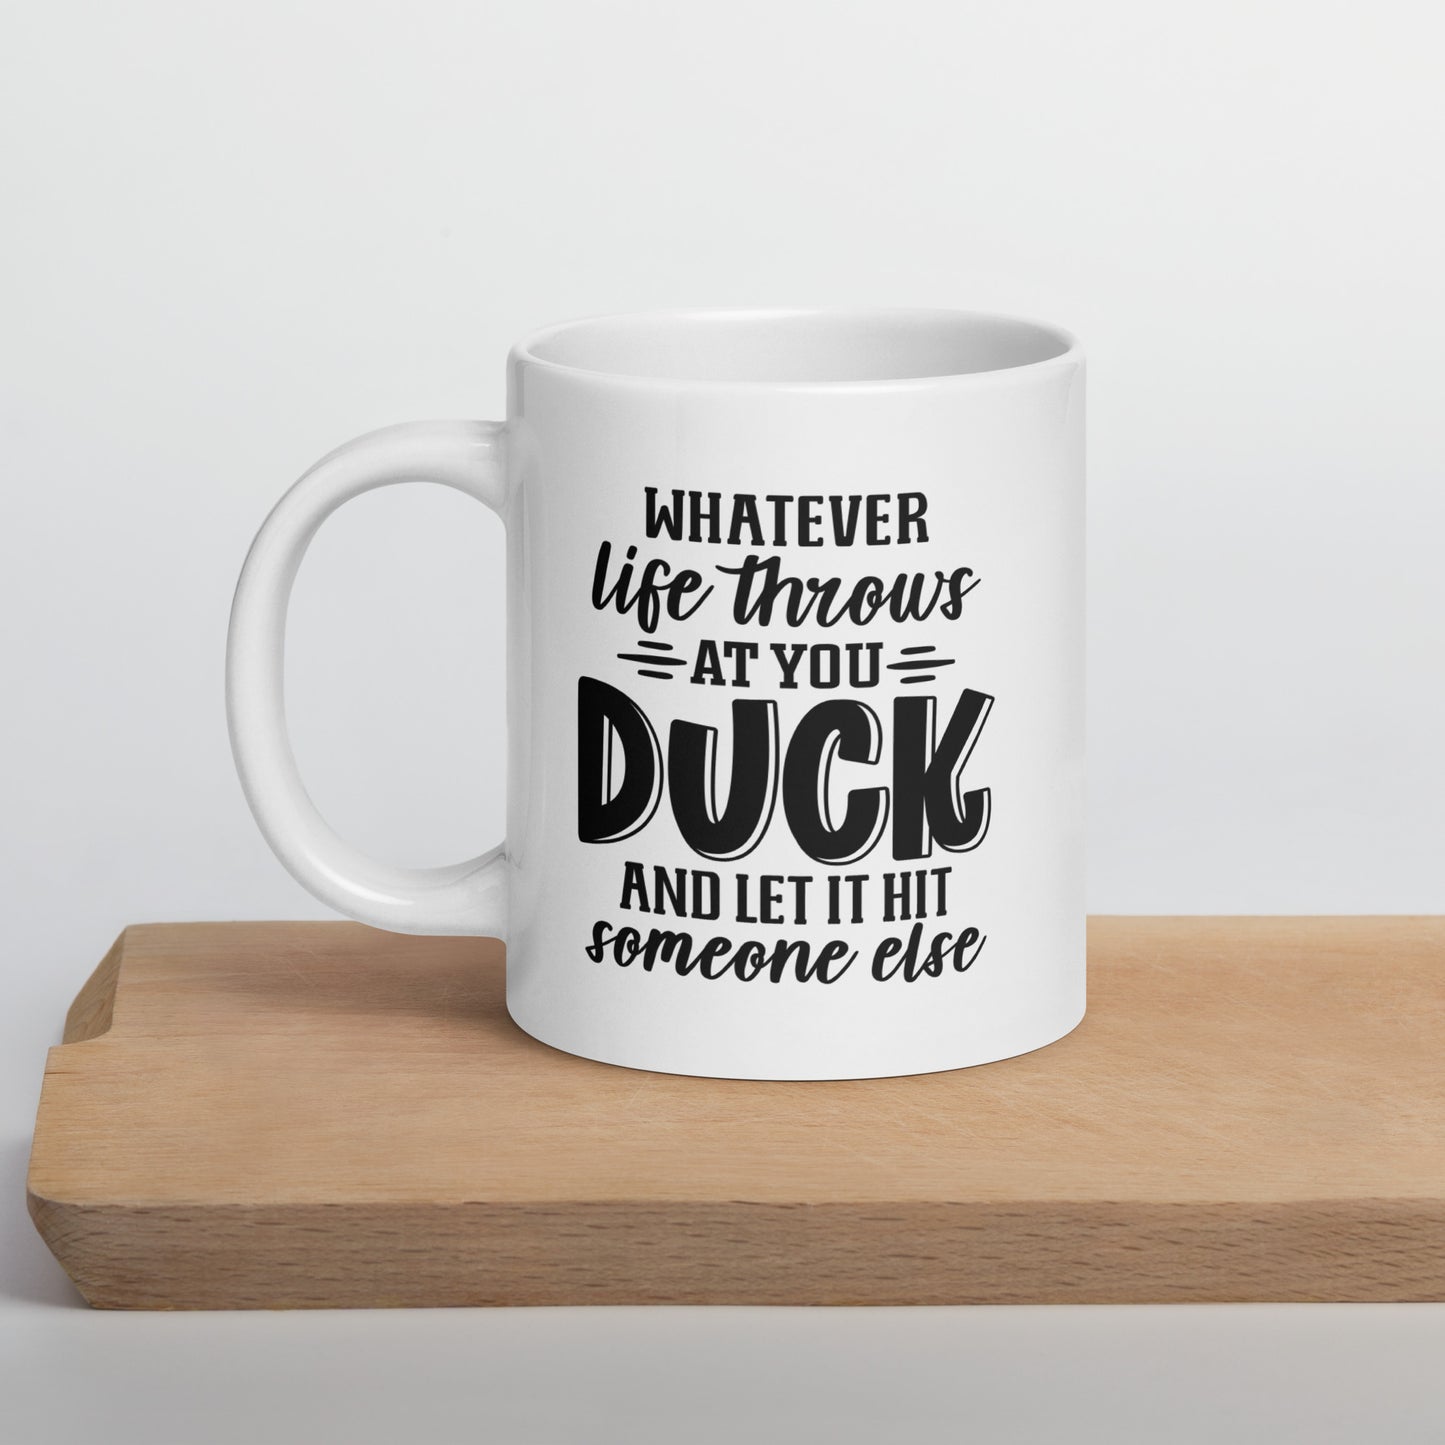 Whatever Life Throws At You, Duck And Let It Hit Someone Else - White Ceramic Coffee Mug